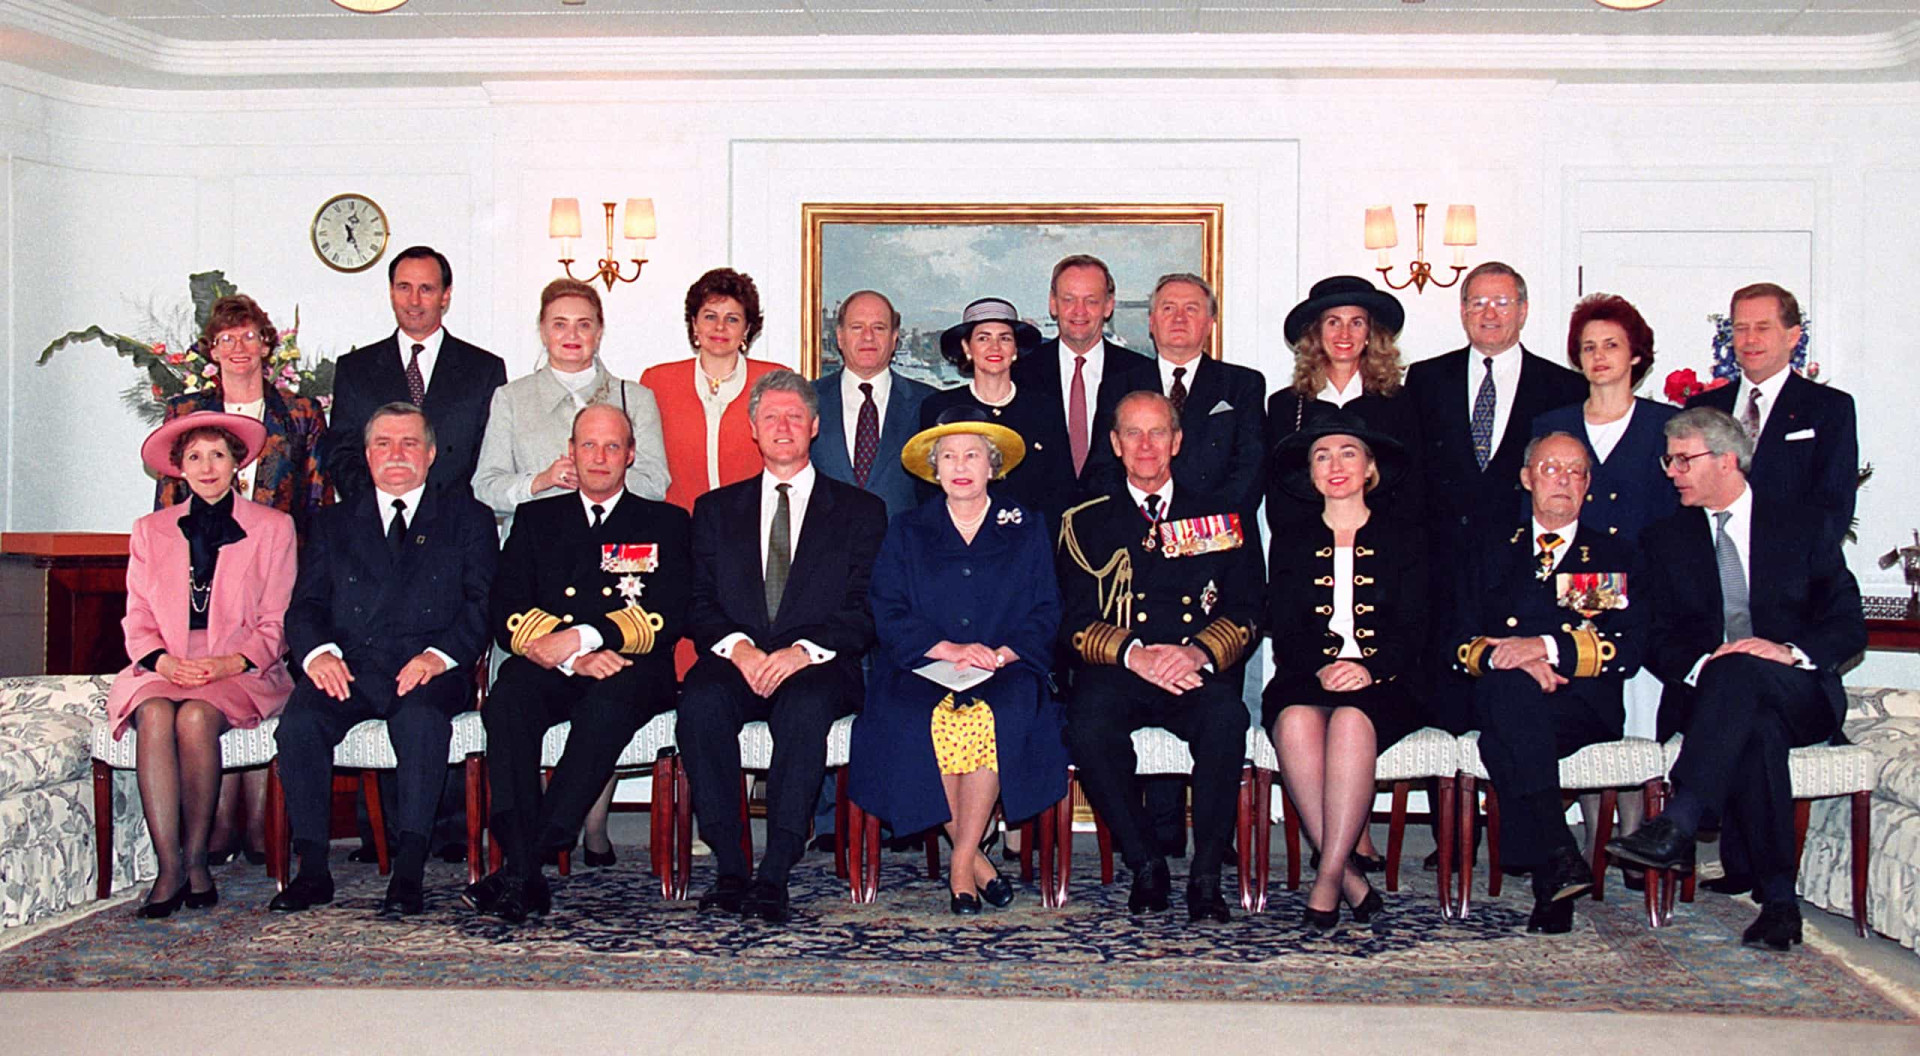 <p>The Queen, Heads of State, and their wives aboard the Royal Yacht <em>Britannia</em> for the D-Day 50th anniversary celebrations, US President Bill Clinton among them. Besides hosting politically- and diplomatically-themed functions, Britannia held numerous "Sea Days"— British overseas trade missions to promote business, trade, and industry around the globe.</p><p><a href="https://www.msn.com/en-ph/community/channel/vid-7xx8mnucu55yw63we9va2gwr7uihbxwc68fxqp25x6tg4ftibpra?cvid=94631541bc0f4f89bfd59158d696ad7e">Follow us and access great exclusive content every day</a></p>